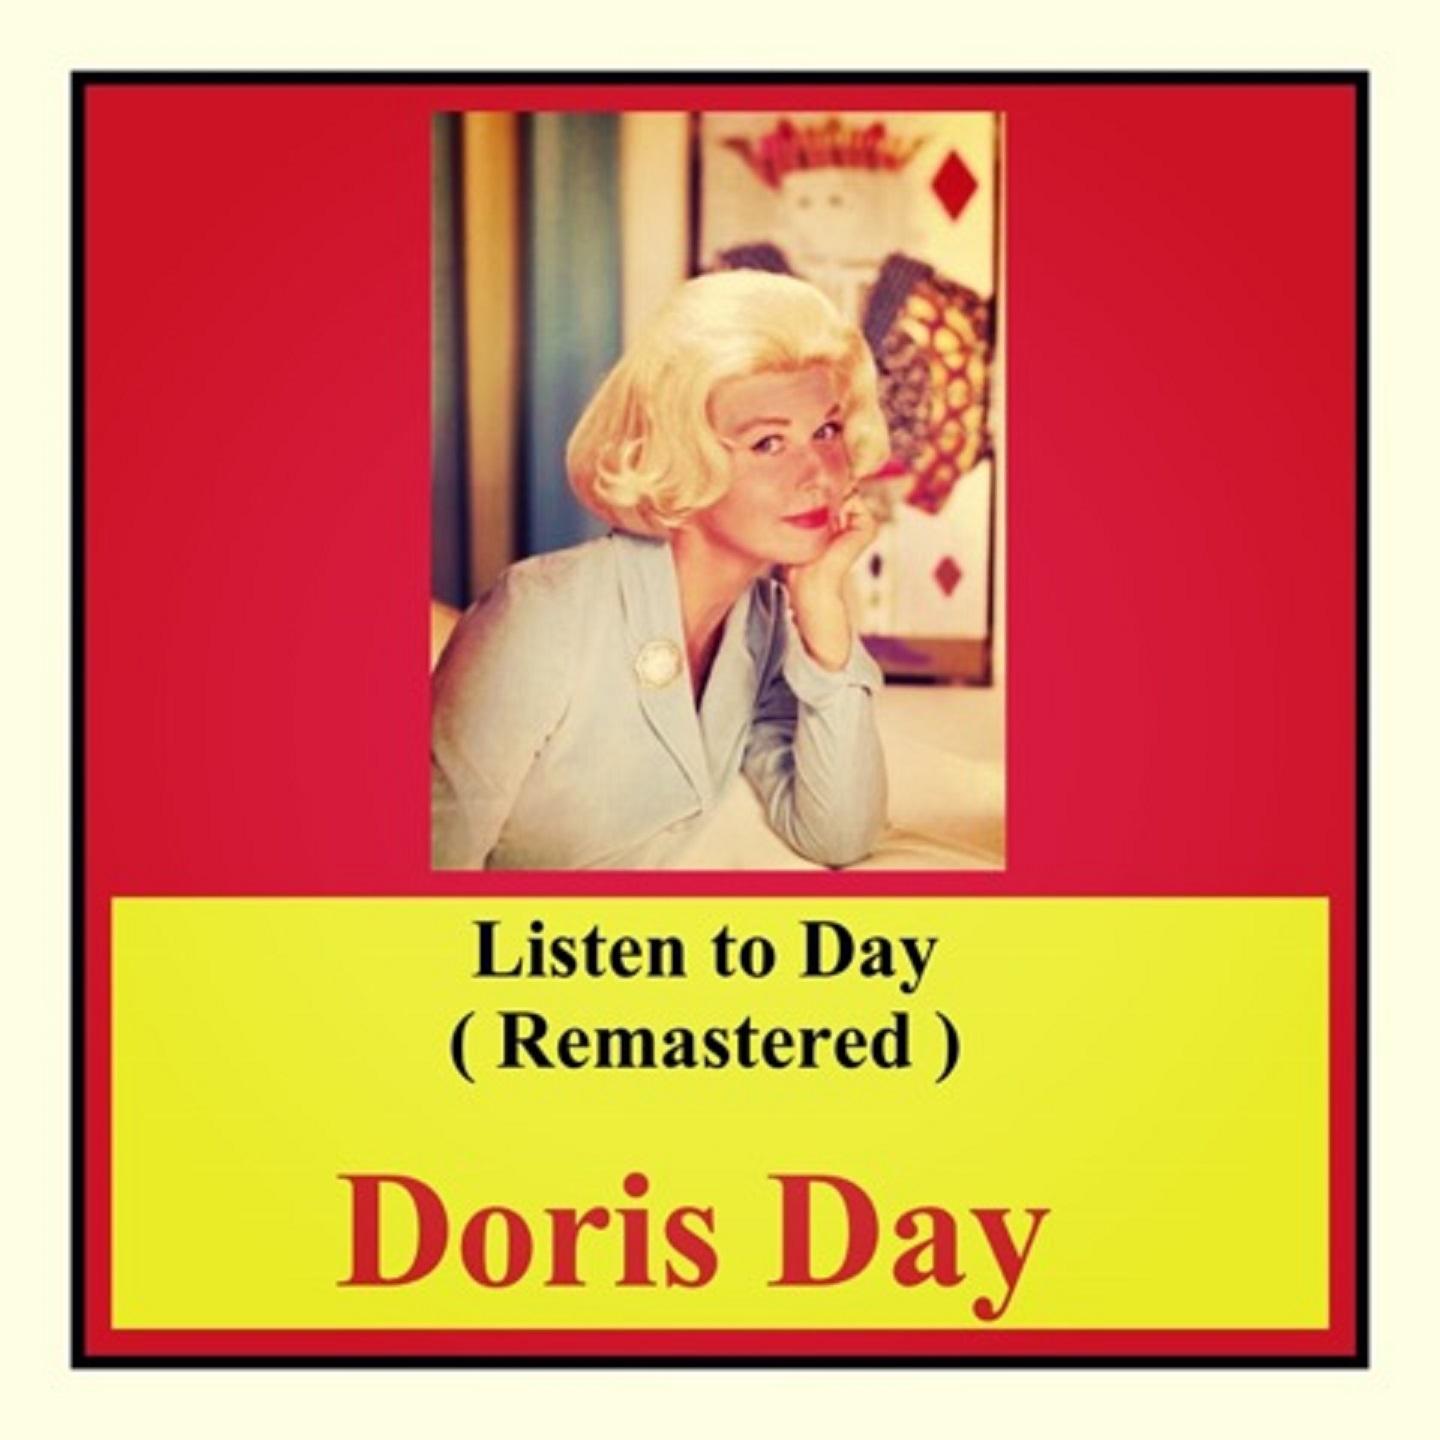 Listen to Day (Remastered)